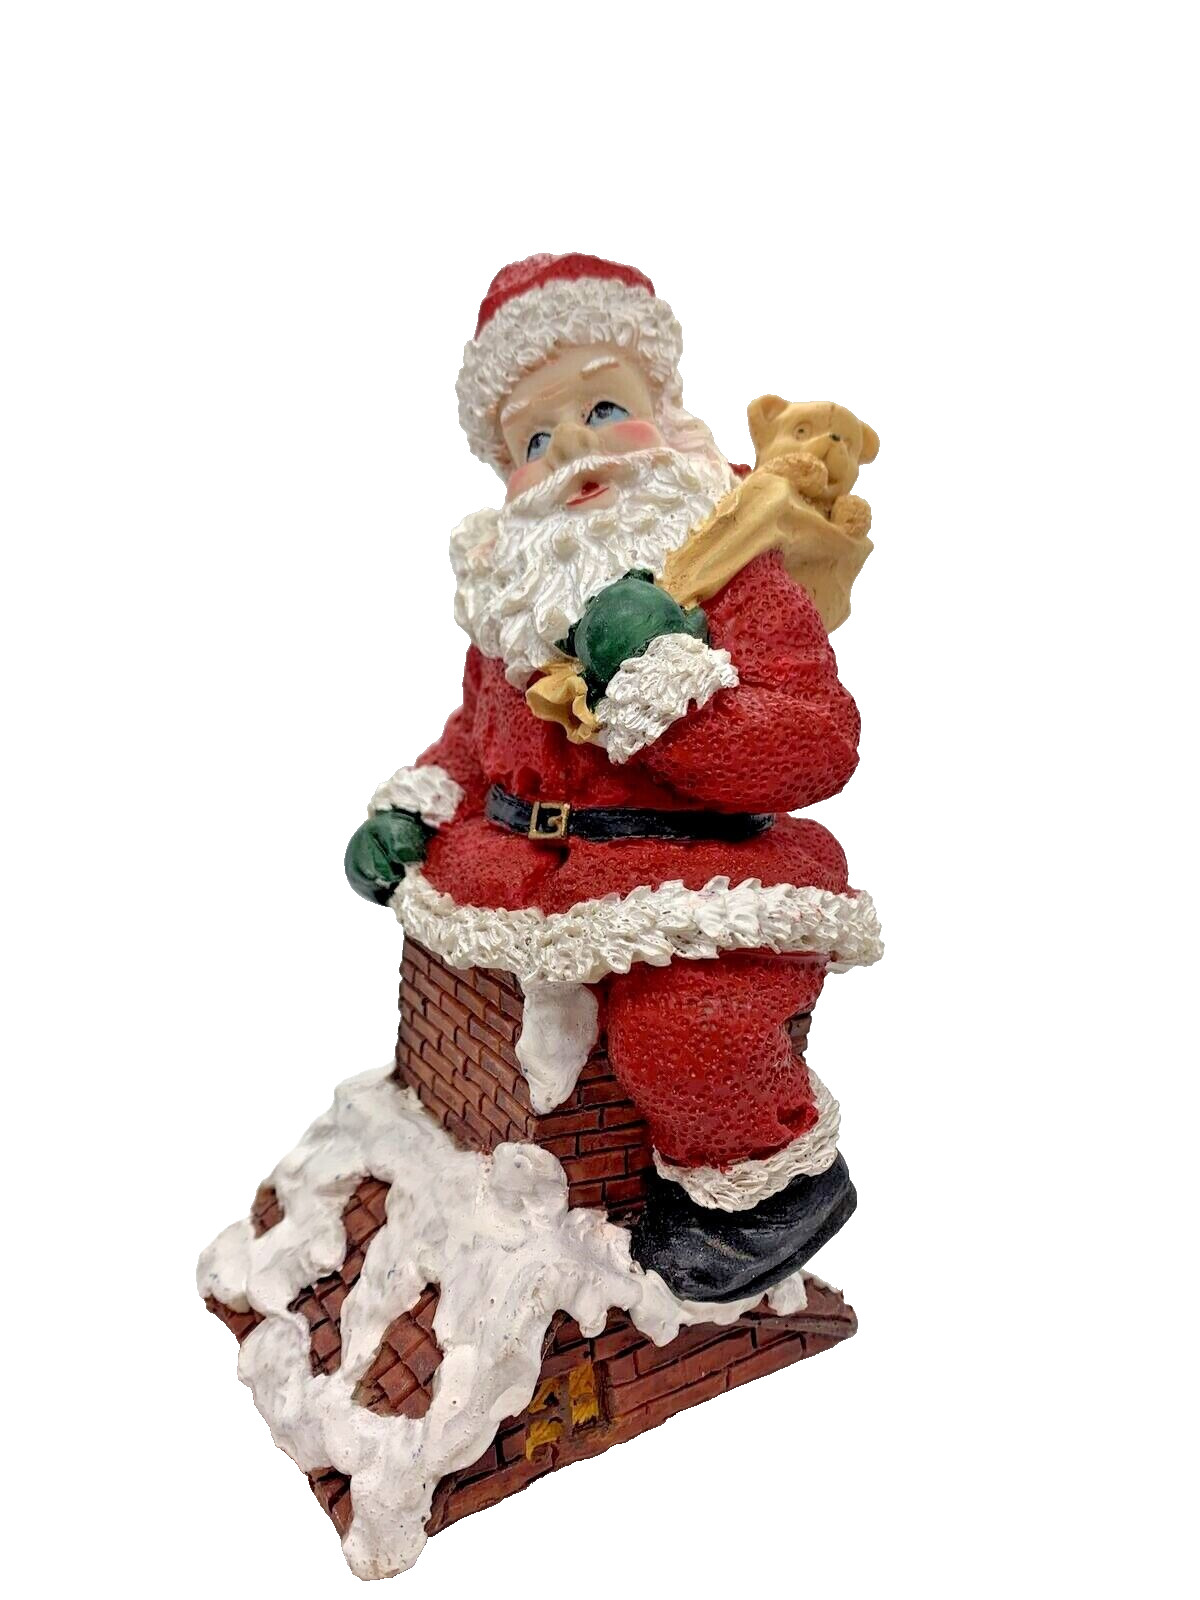 SANTA CLAUS FIGURINE 7” CHRISTMAS ORNAMENT CLIMBING CHIMNEY WITH PRESENTS, GIFTS